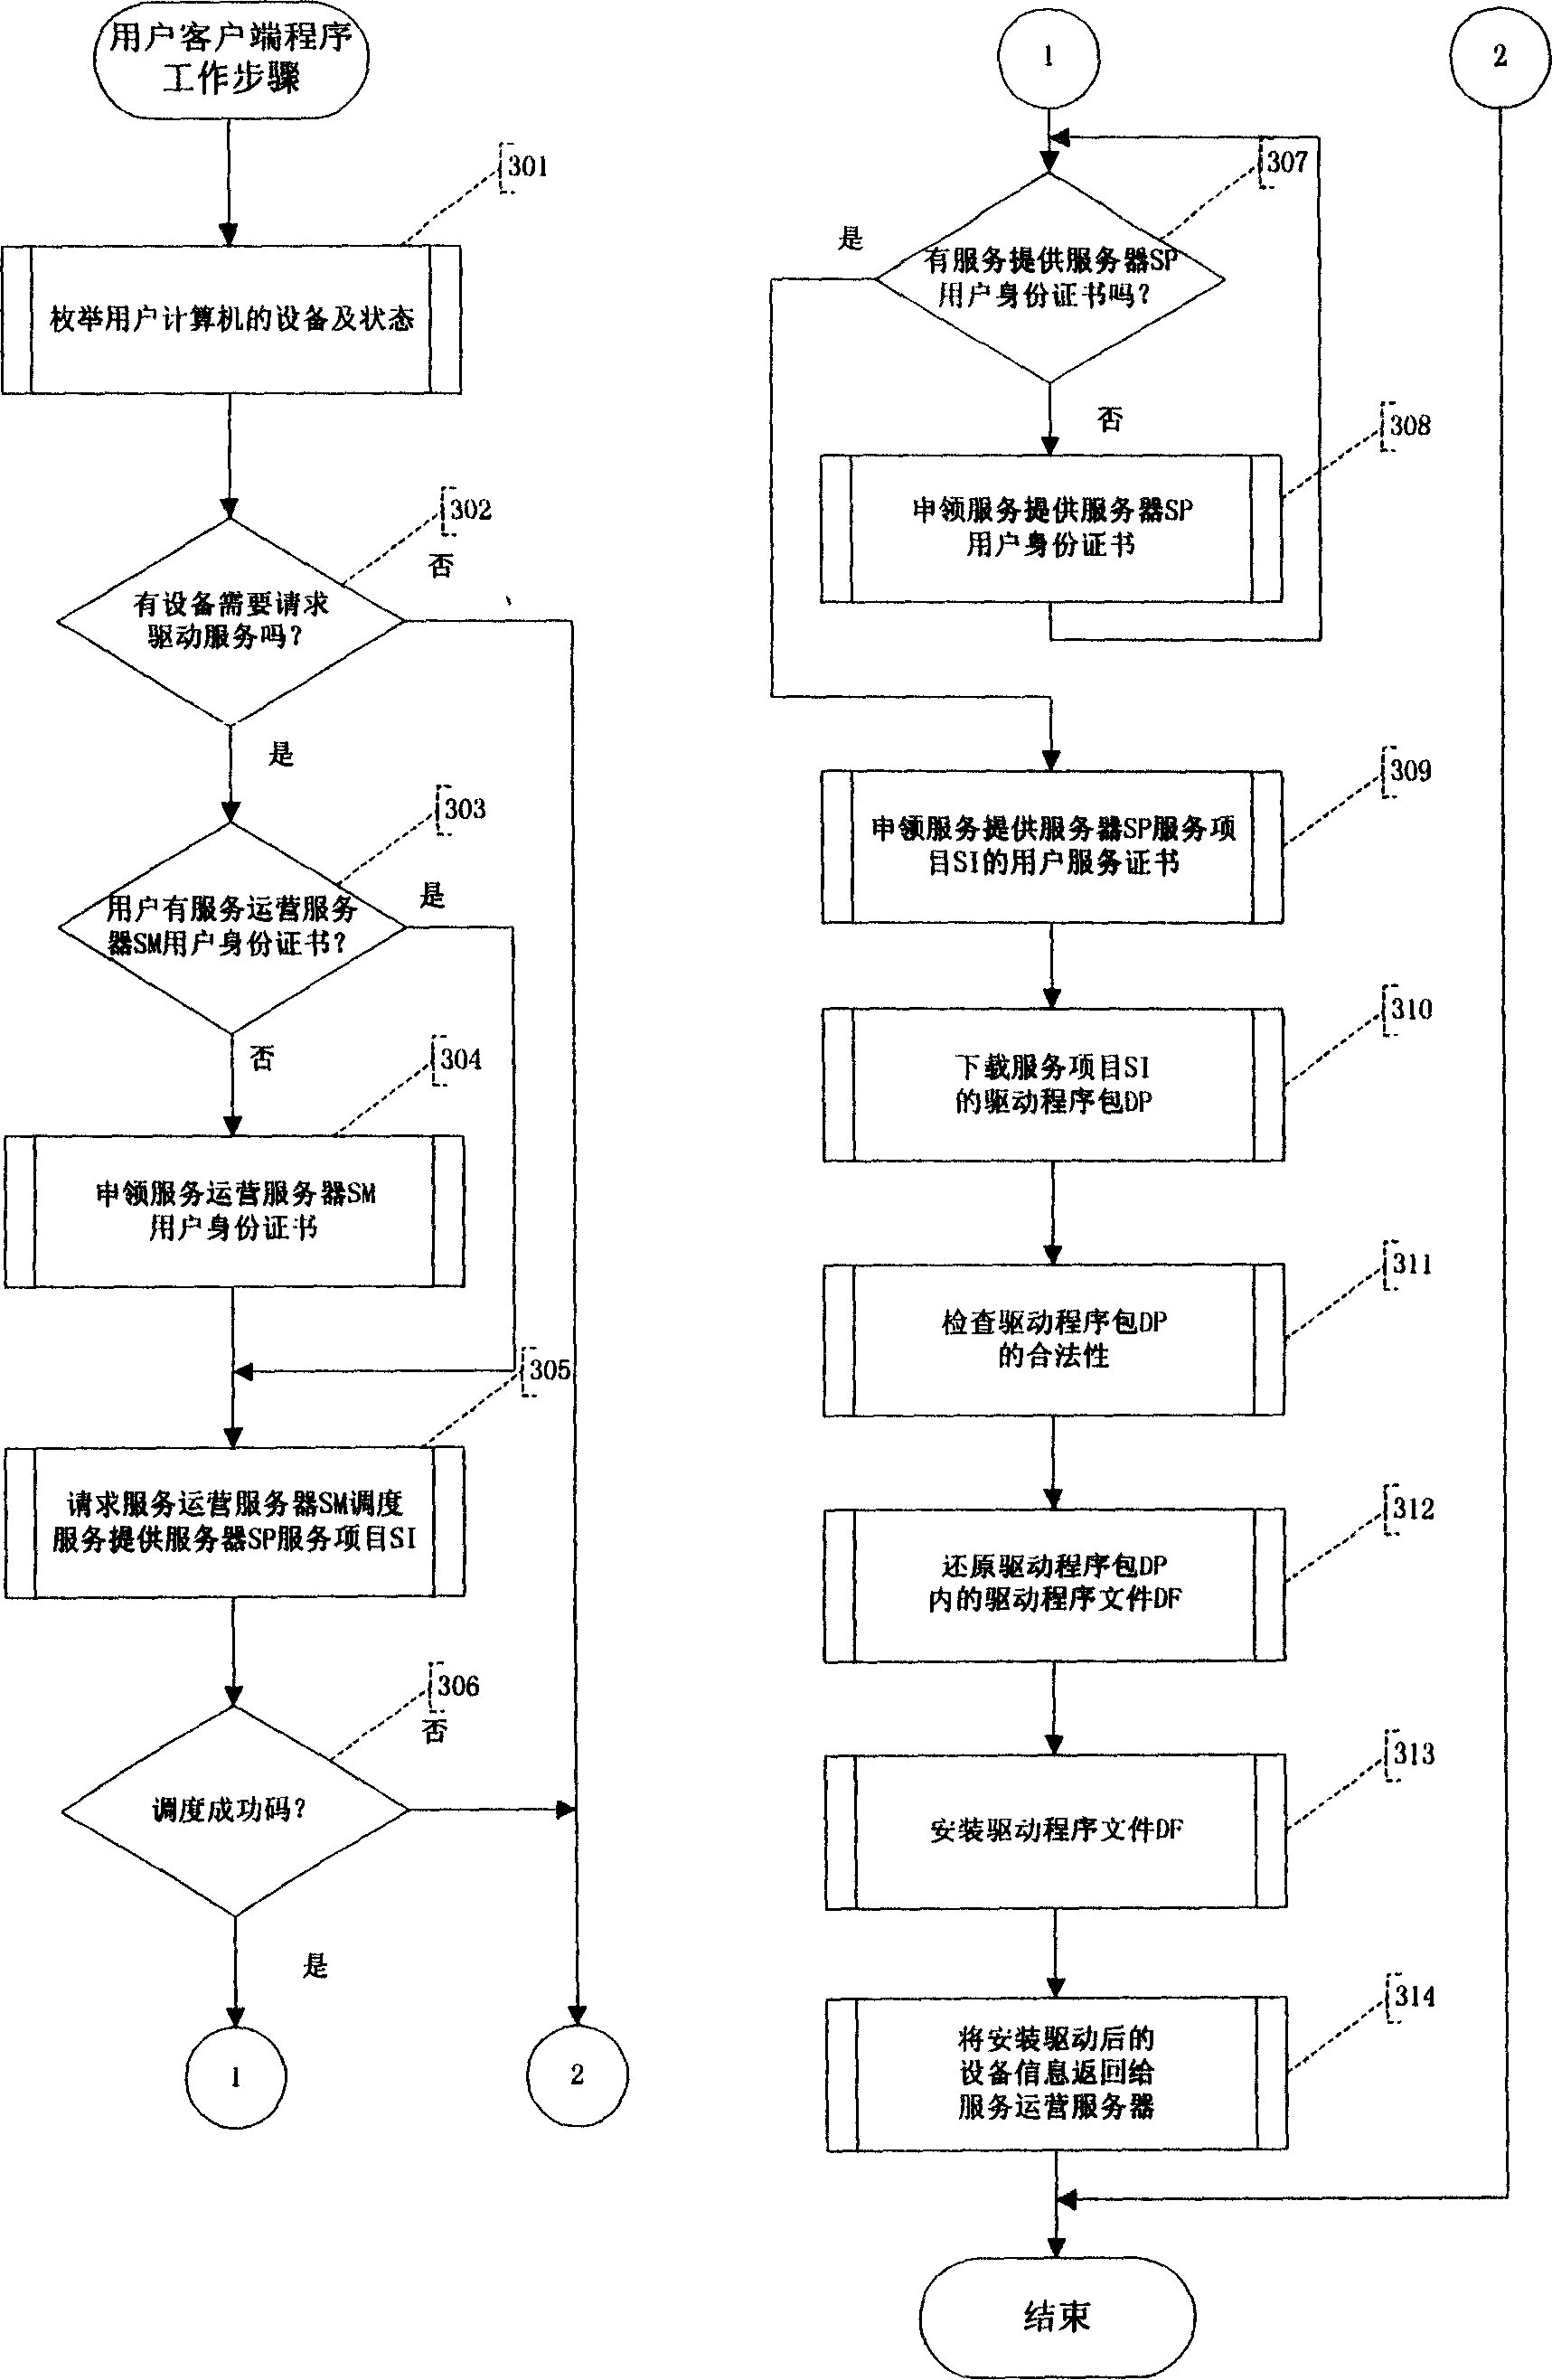 Method for implementing computer driving service security network system